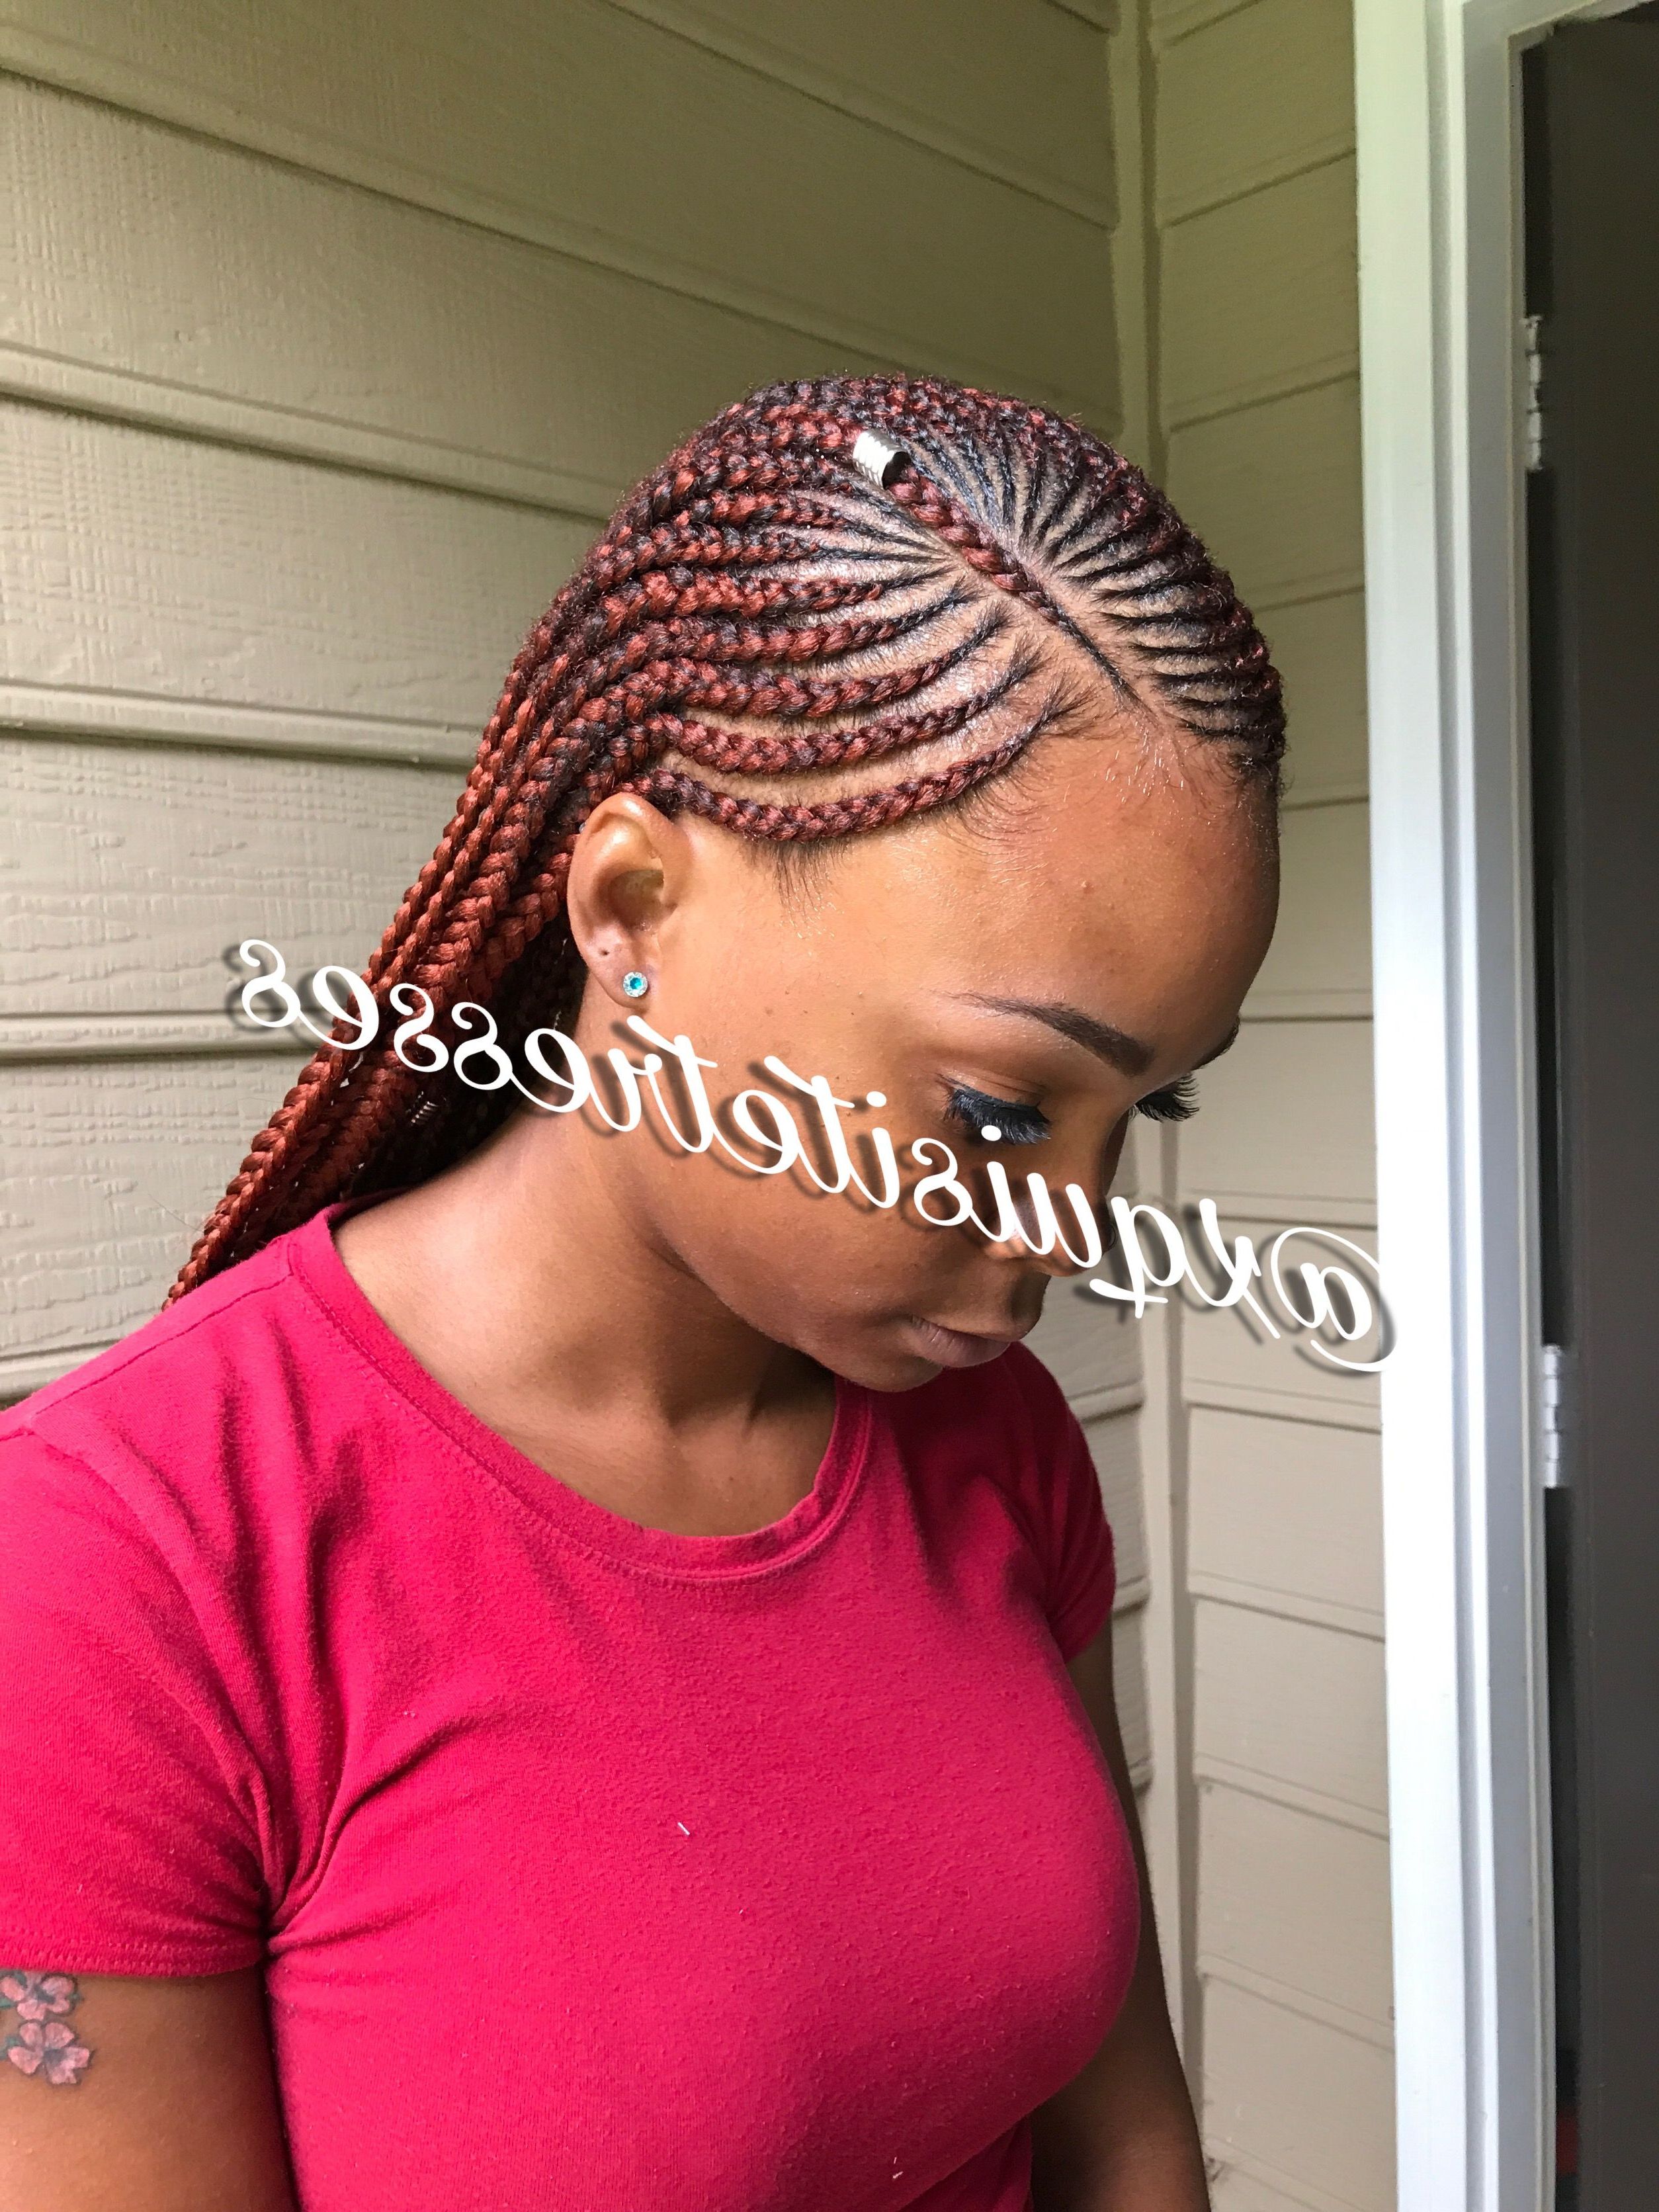 Well Liked Tight Black Swirling Under Braid Hairstyles In Tribal Feed In Braids Follow On Ig @xquisitetresses (Gallery 20 of 20)